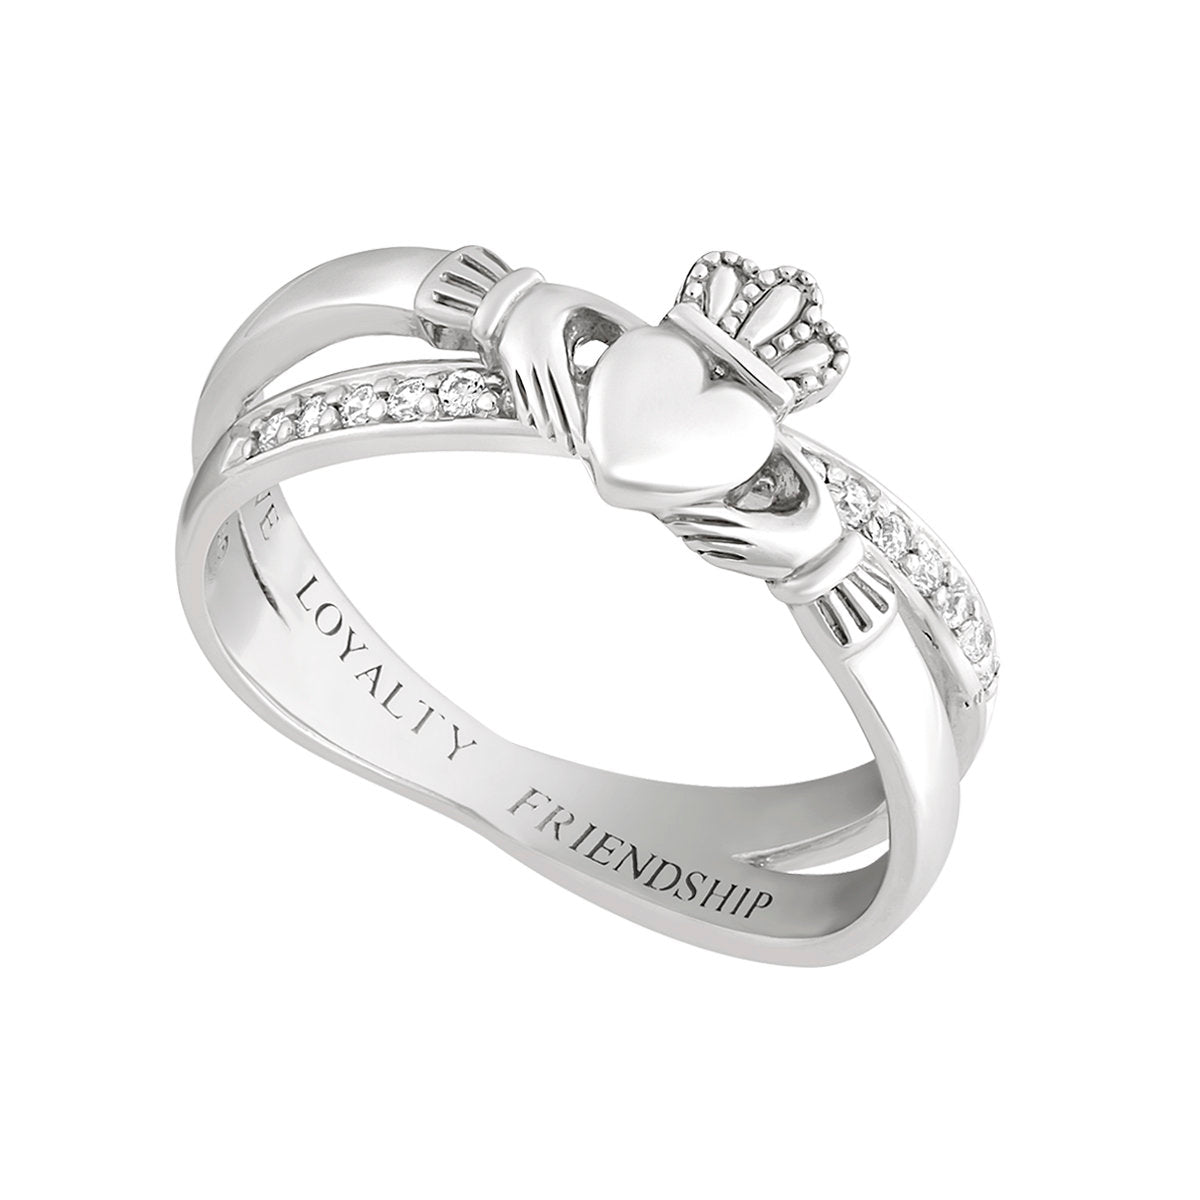 What Is a Claddagh Ring and What Does It Mean?